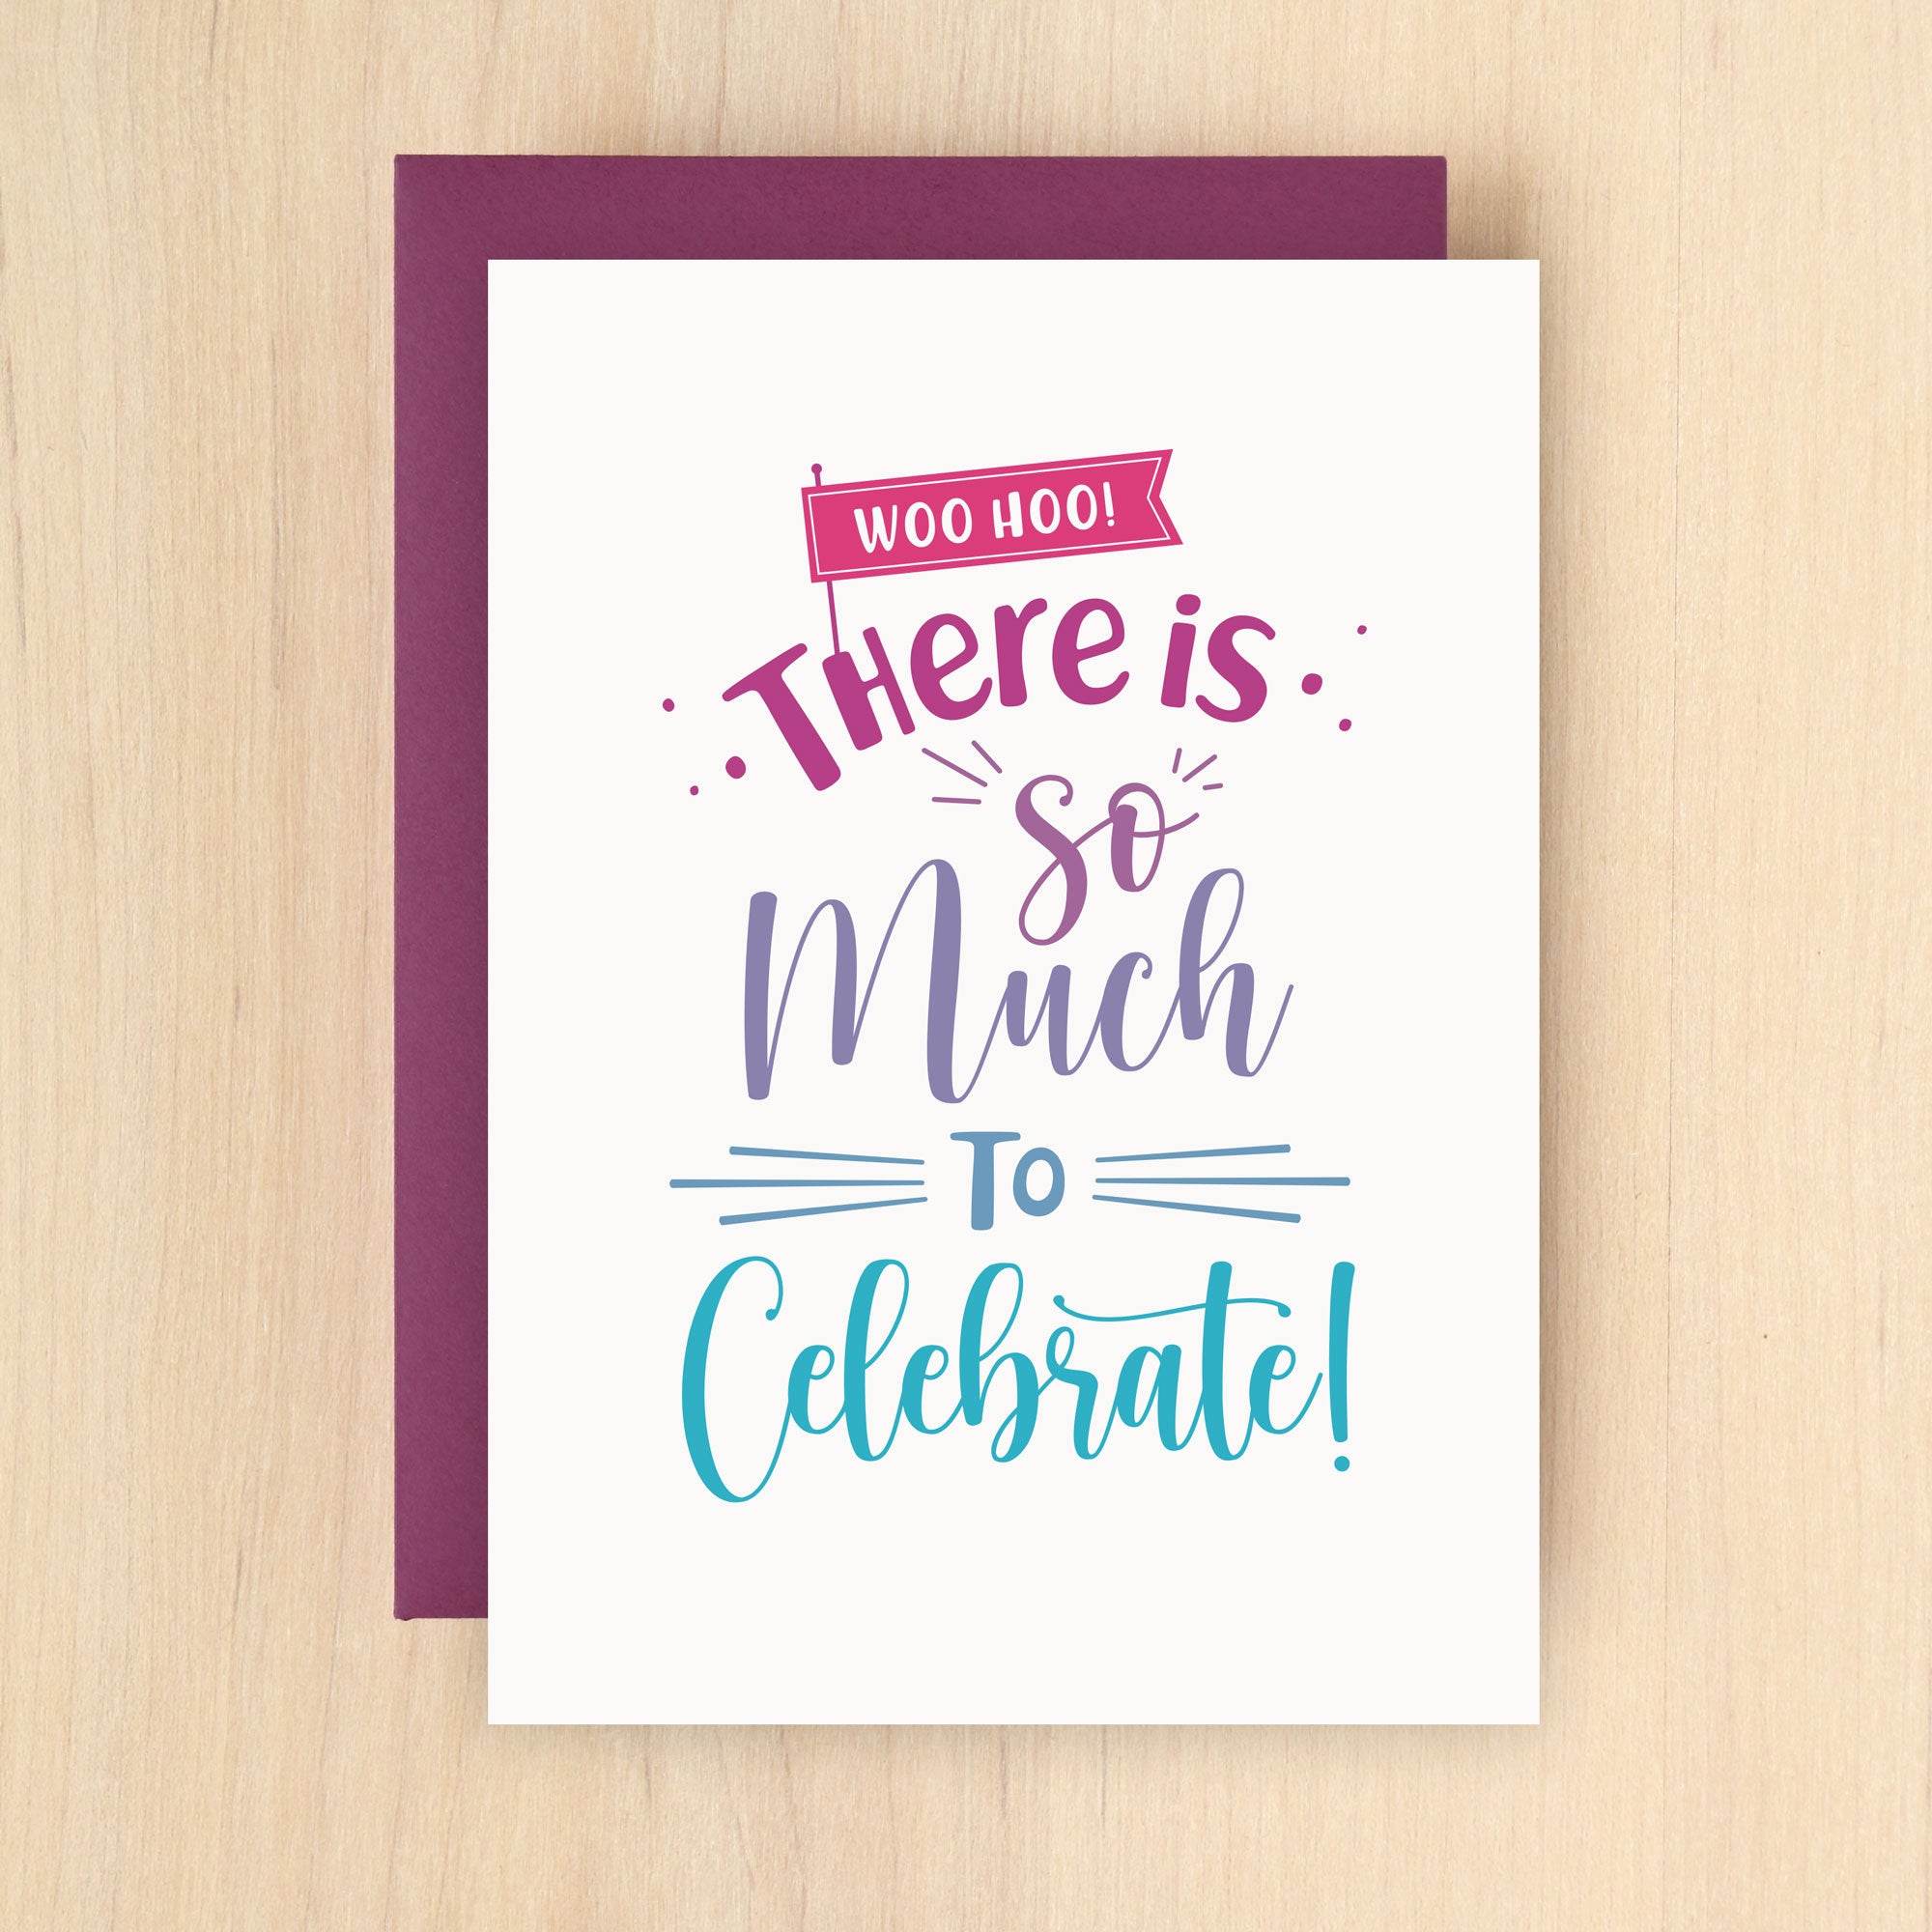 "Woo Hoo! There is so much to celebrate!" So Much Greeting Card #273